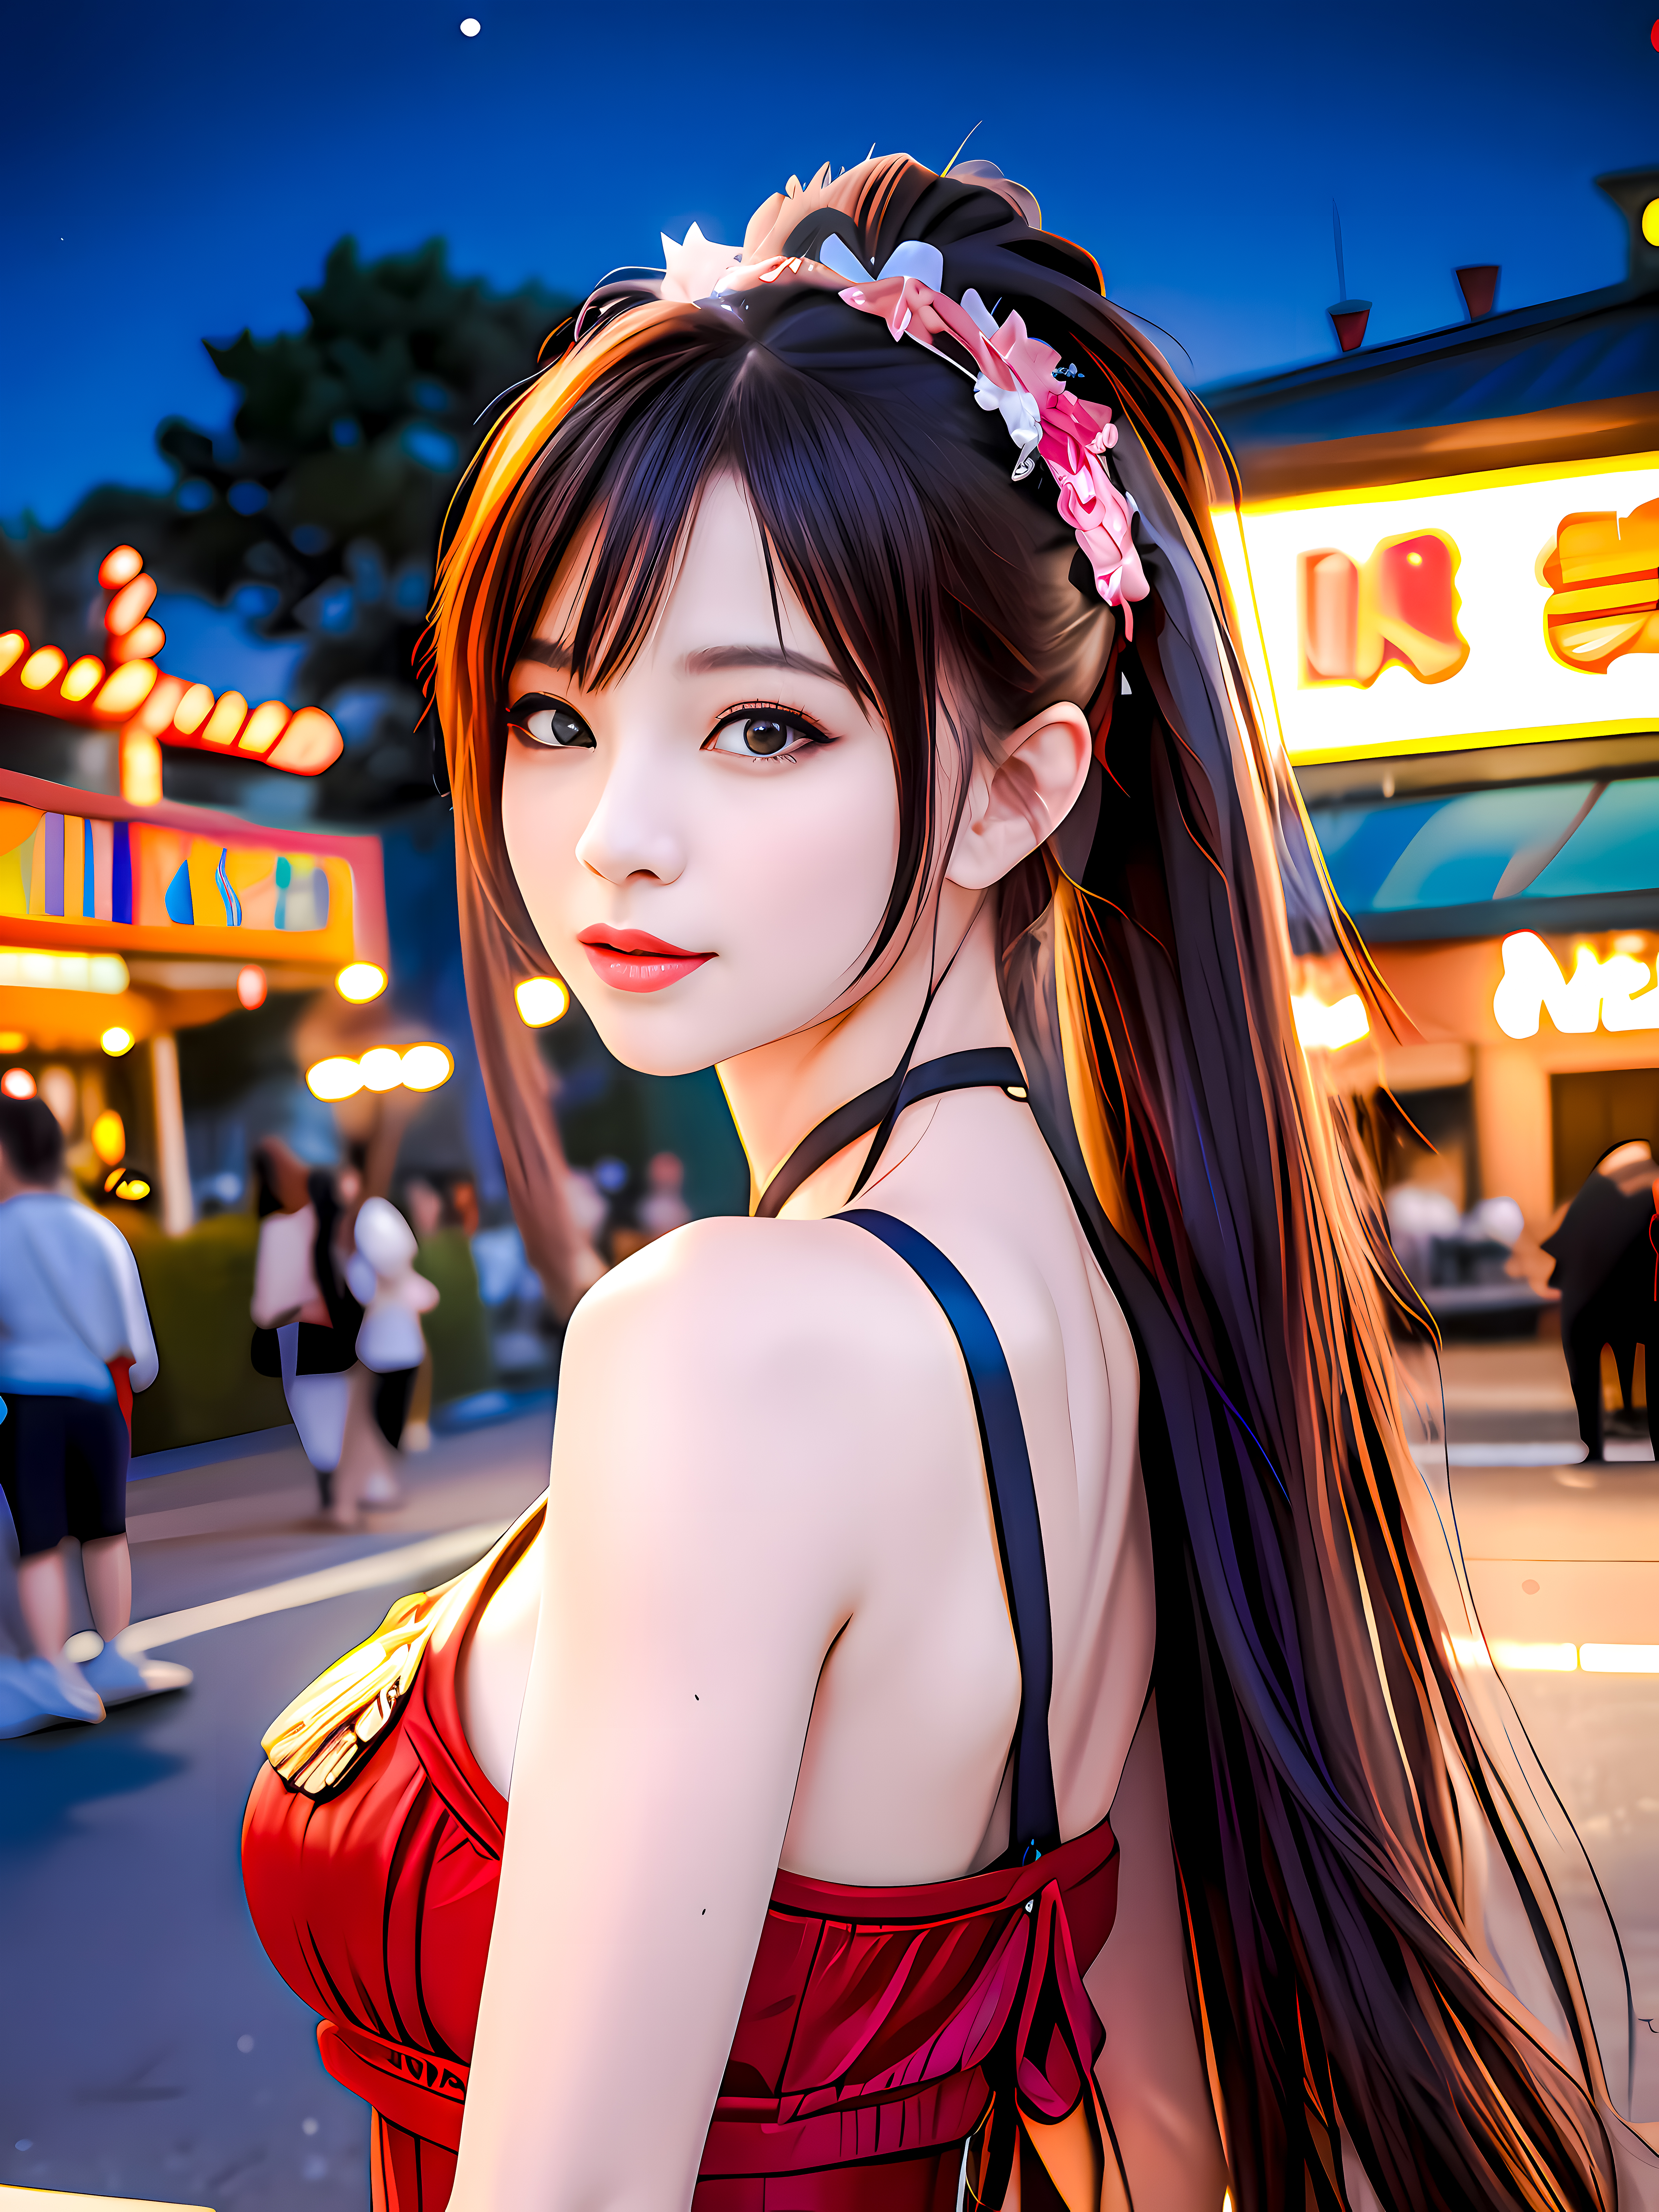 Anime 4915x6554 AI art Asian women long hair flower in hair looking at viewer smiling portrait display blurred blurry background